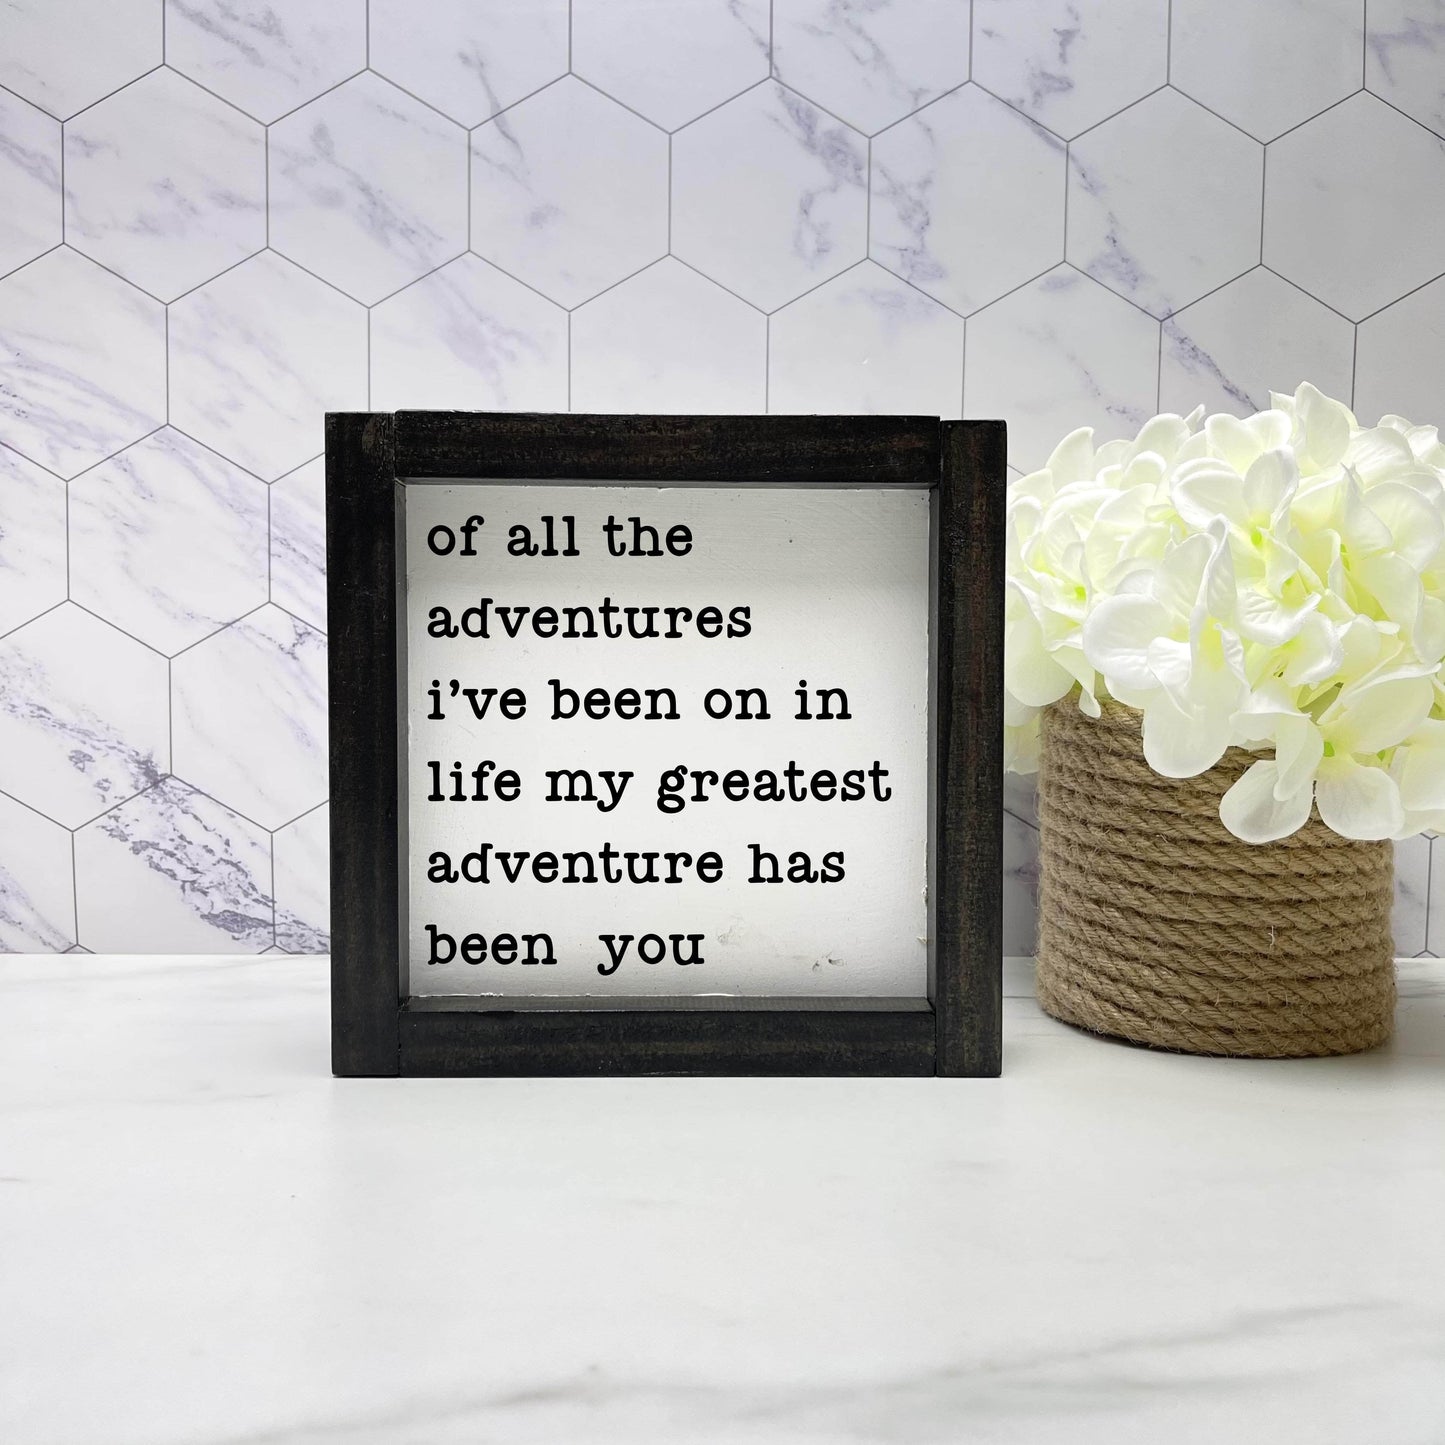 Of all the adventures framed wood sign, farmhouse sign, rustic decor, home decor